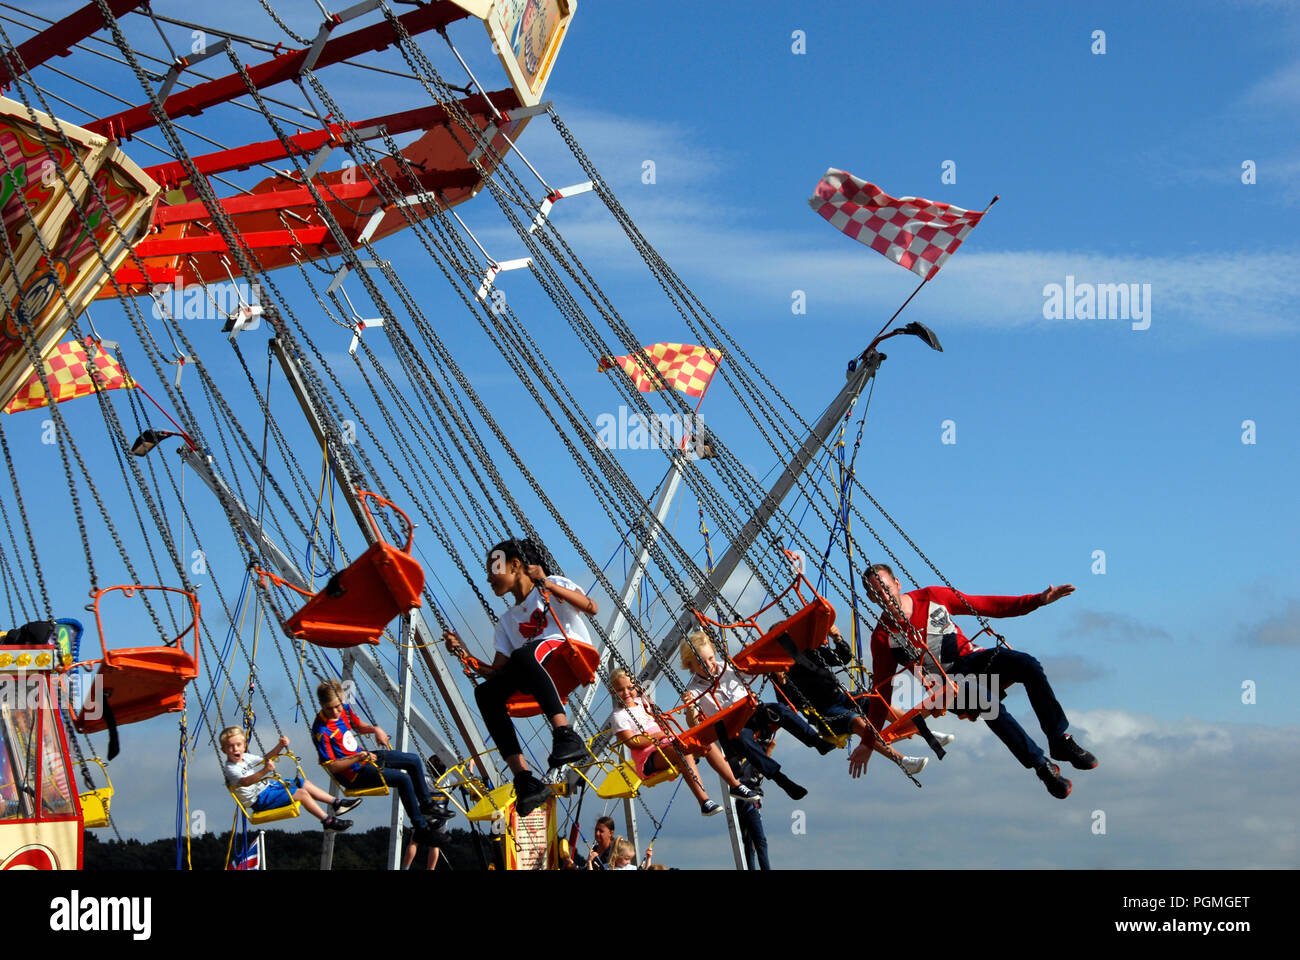 Young people riding on roundabout at fairground Stock Photo